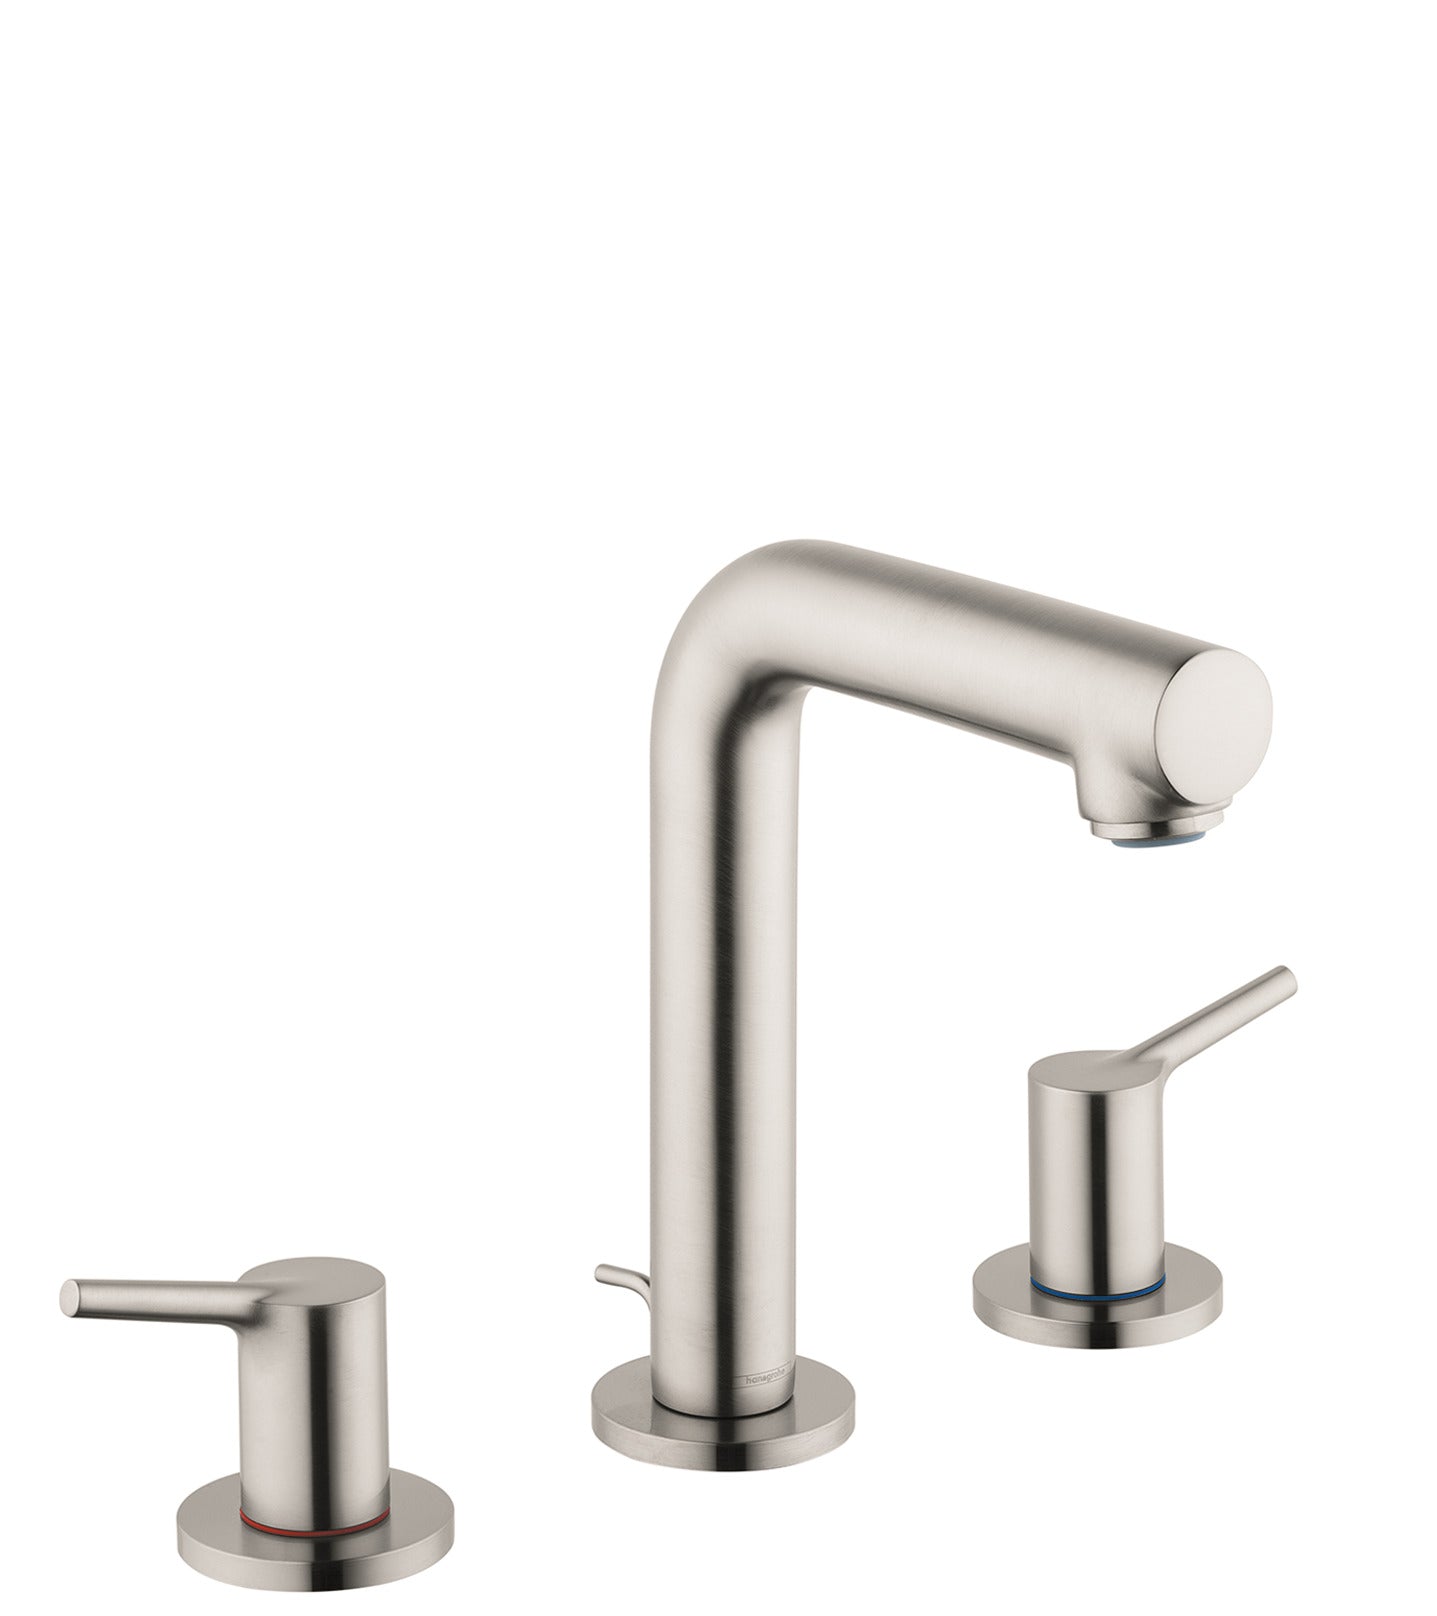 HANSGROHE 72130821 Brushed Nickel Talis S Modern Widespread Bathroom Faucet 1.2 GPM